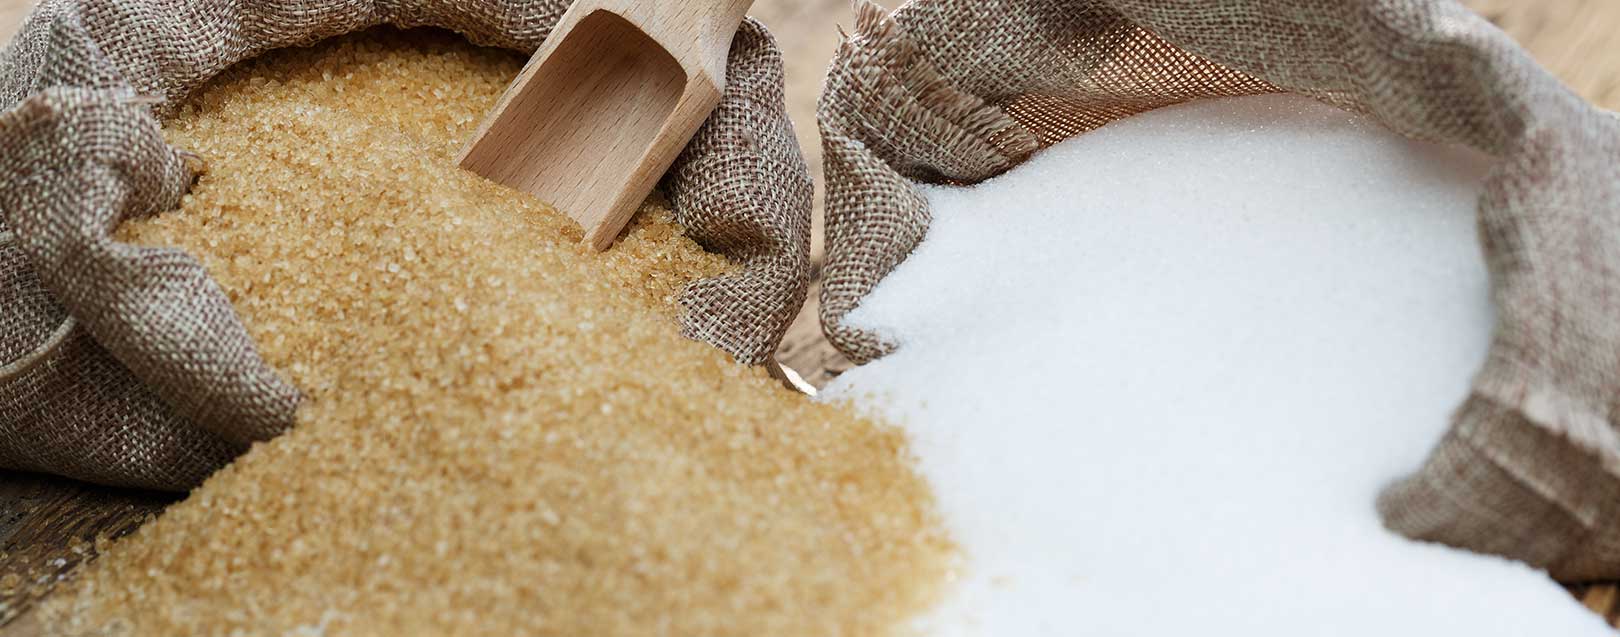 Government likely to hike import duty on sugar to 60%